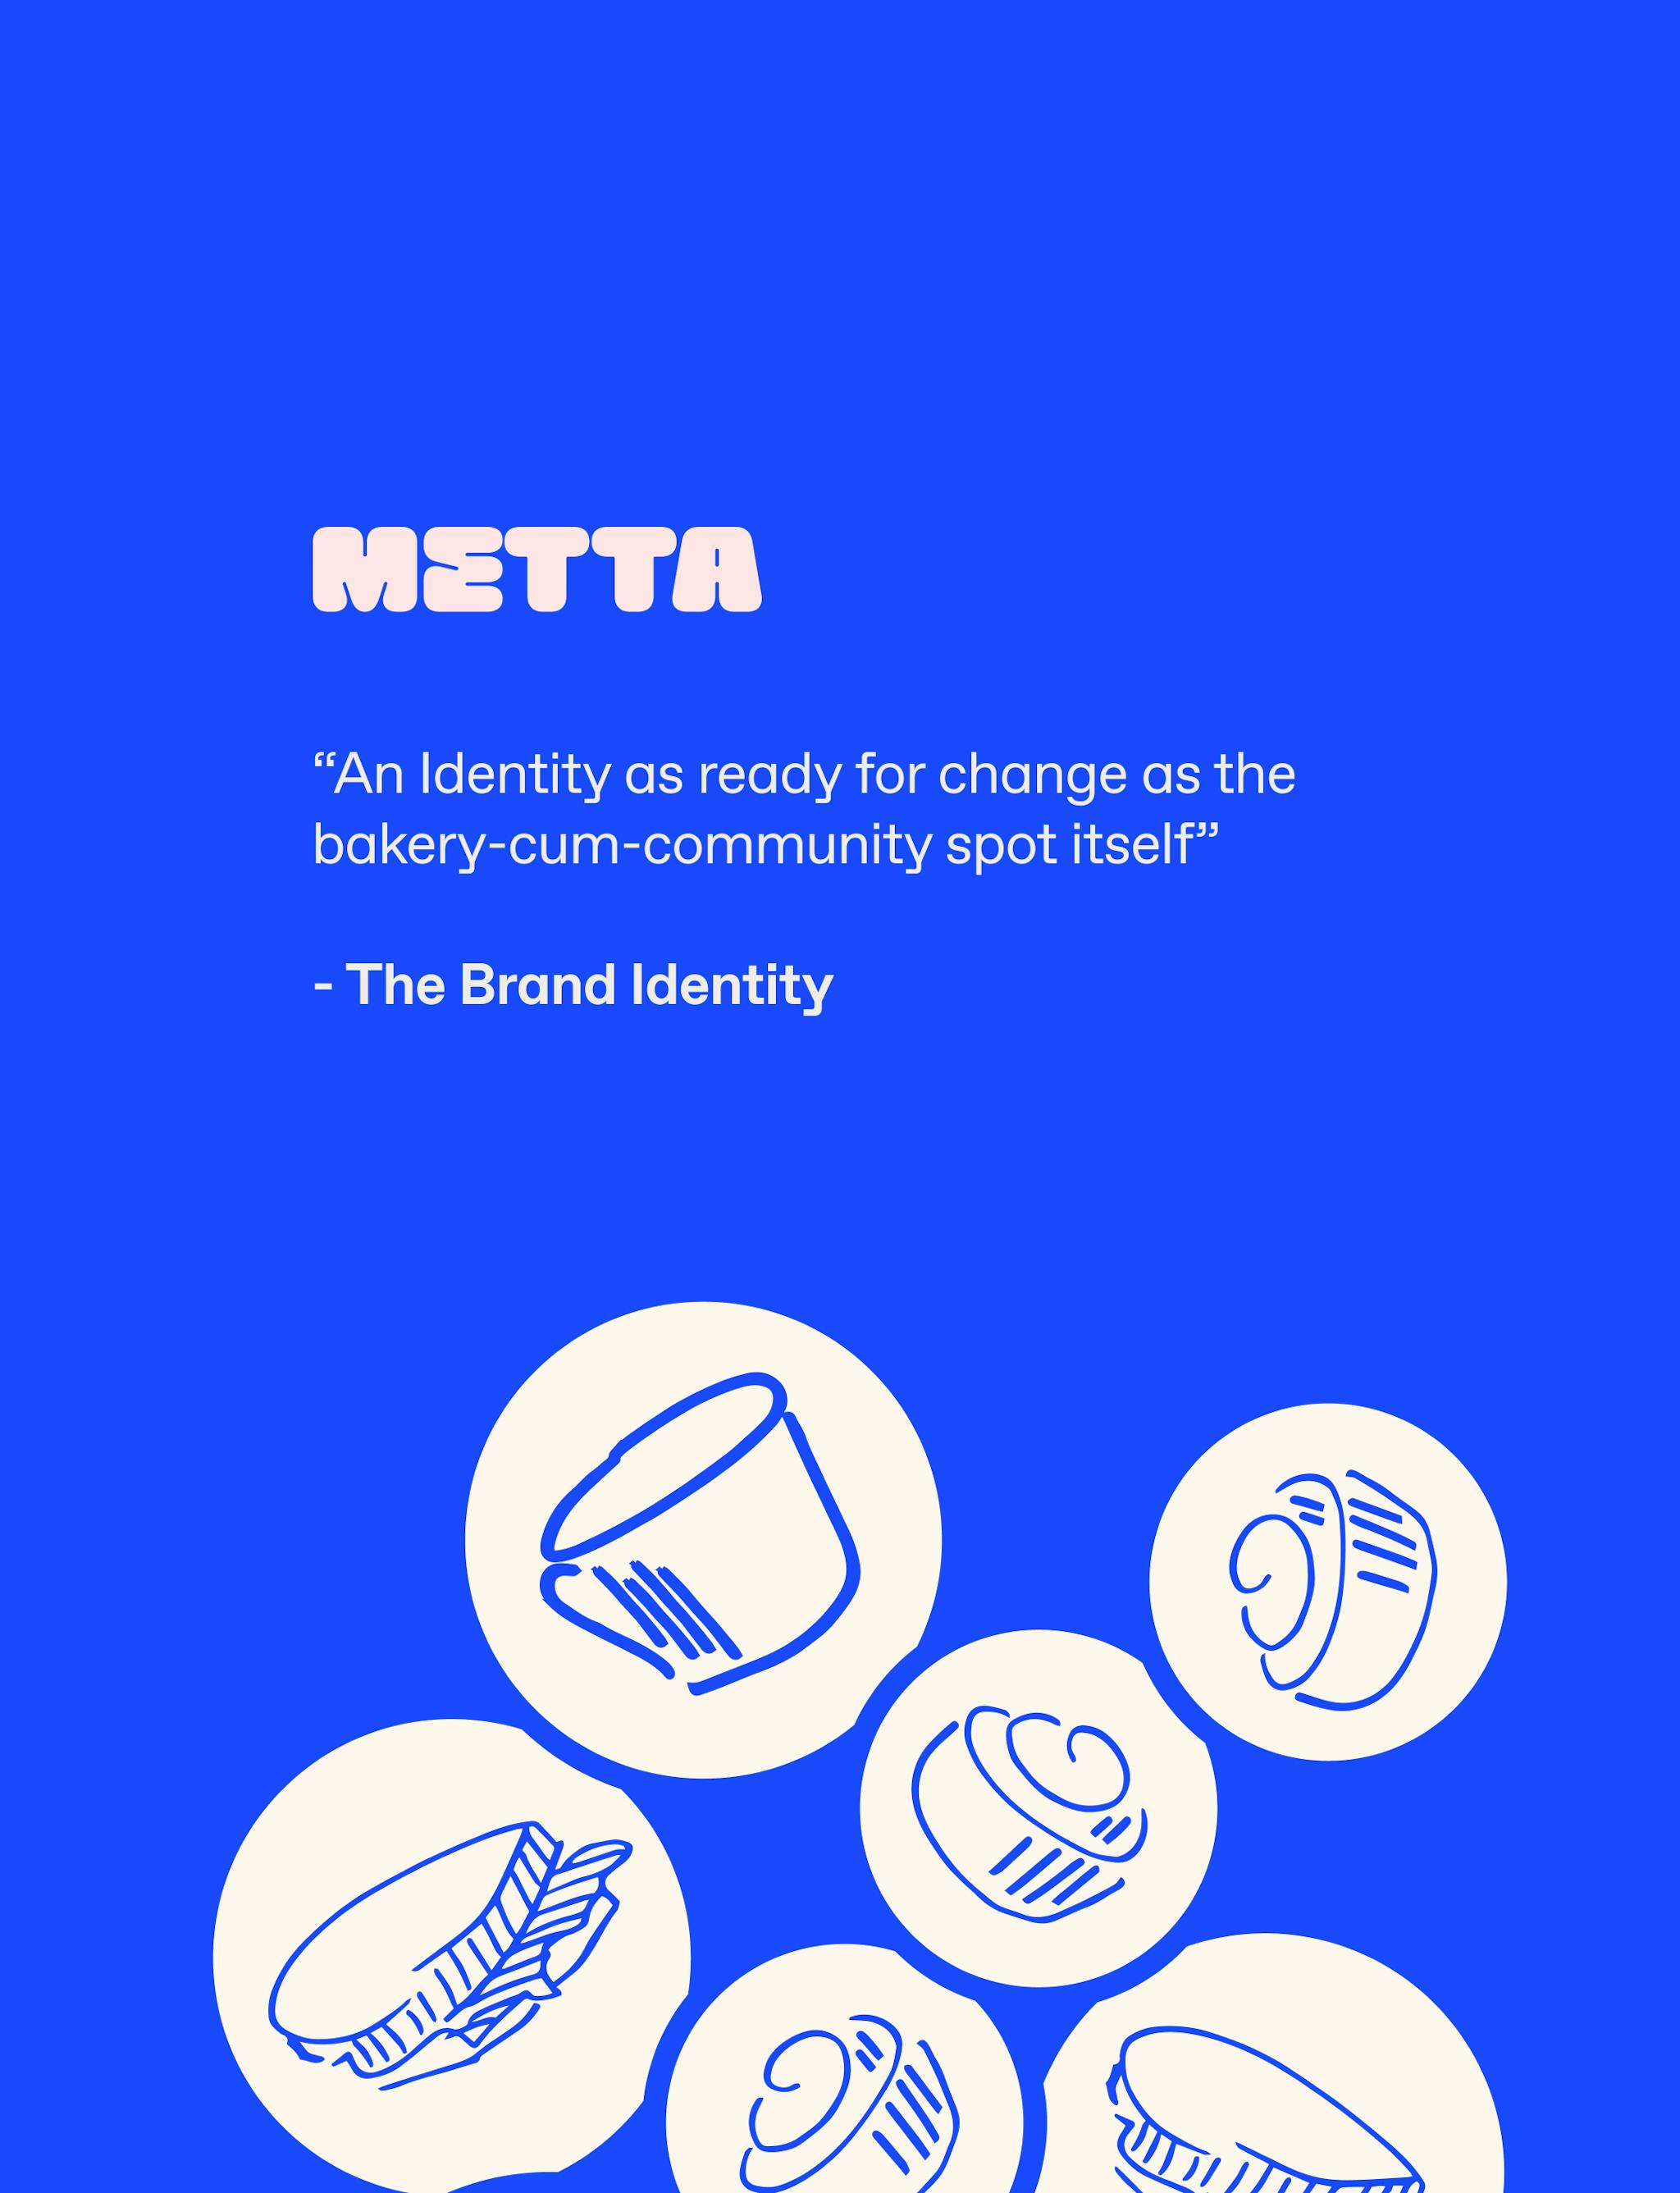 A graphic showing a few auf metta's siignature illustrations and a "The Byrand identity" quote on blue background